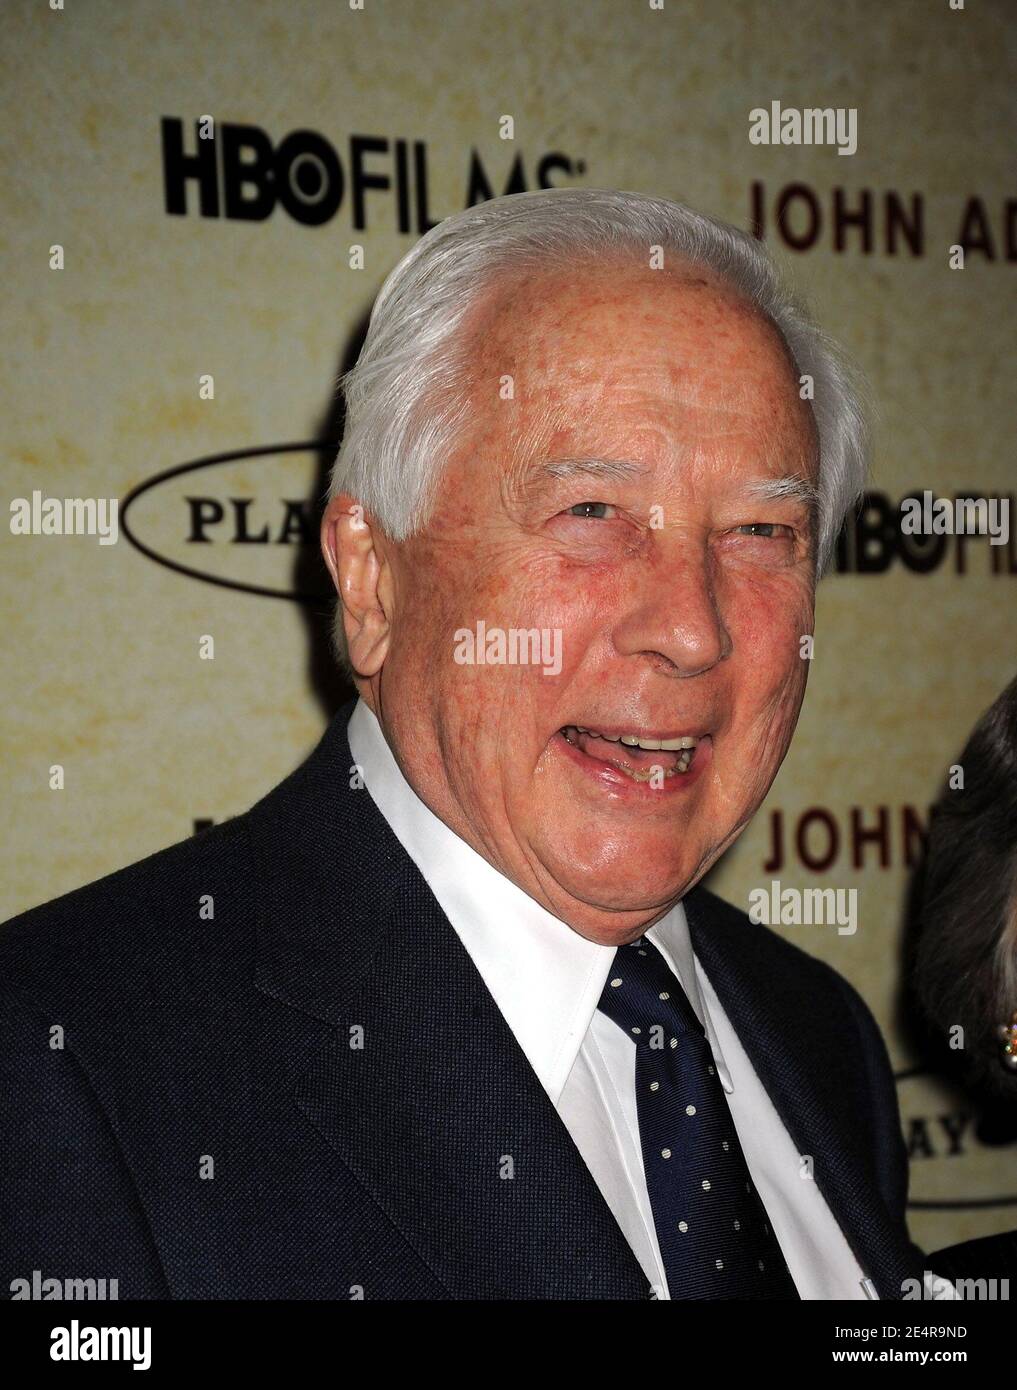 Author David McCullough arriving for the premiere of HBO's first two parts of the Home Box Office miniseries 'John Adams' held at The Museum of Modern Art in New York City, NY, USA on Monday, March 3, 2008. Photo by David Miller/ABACAPRESS.COM Stock Photo